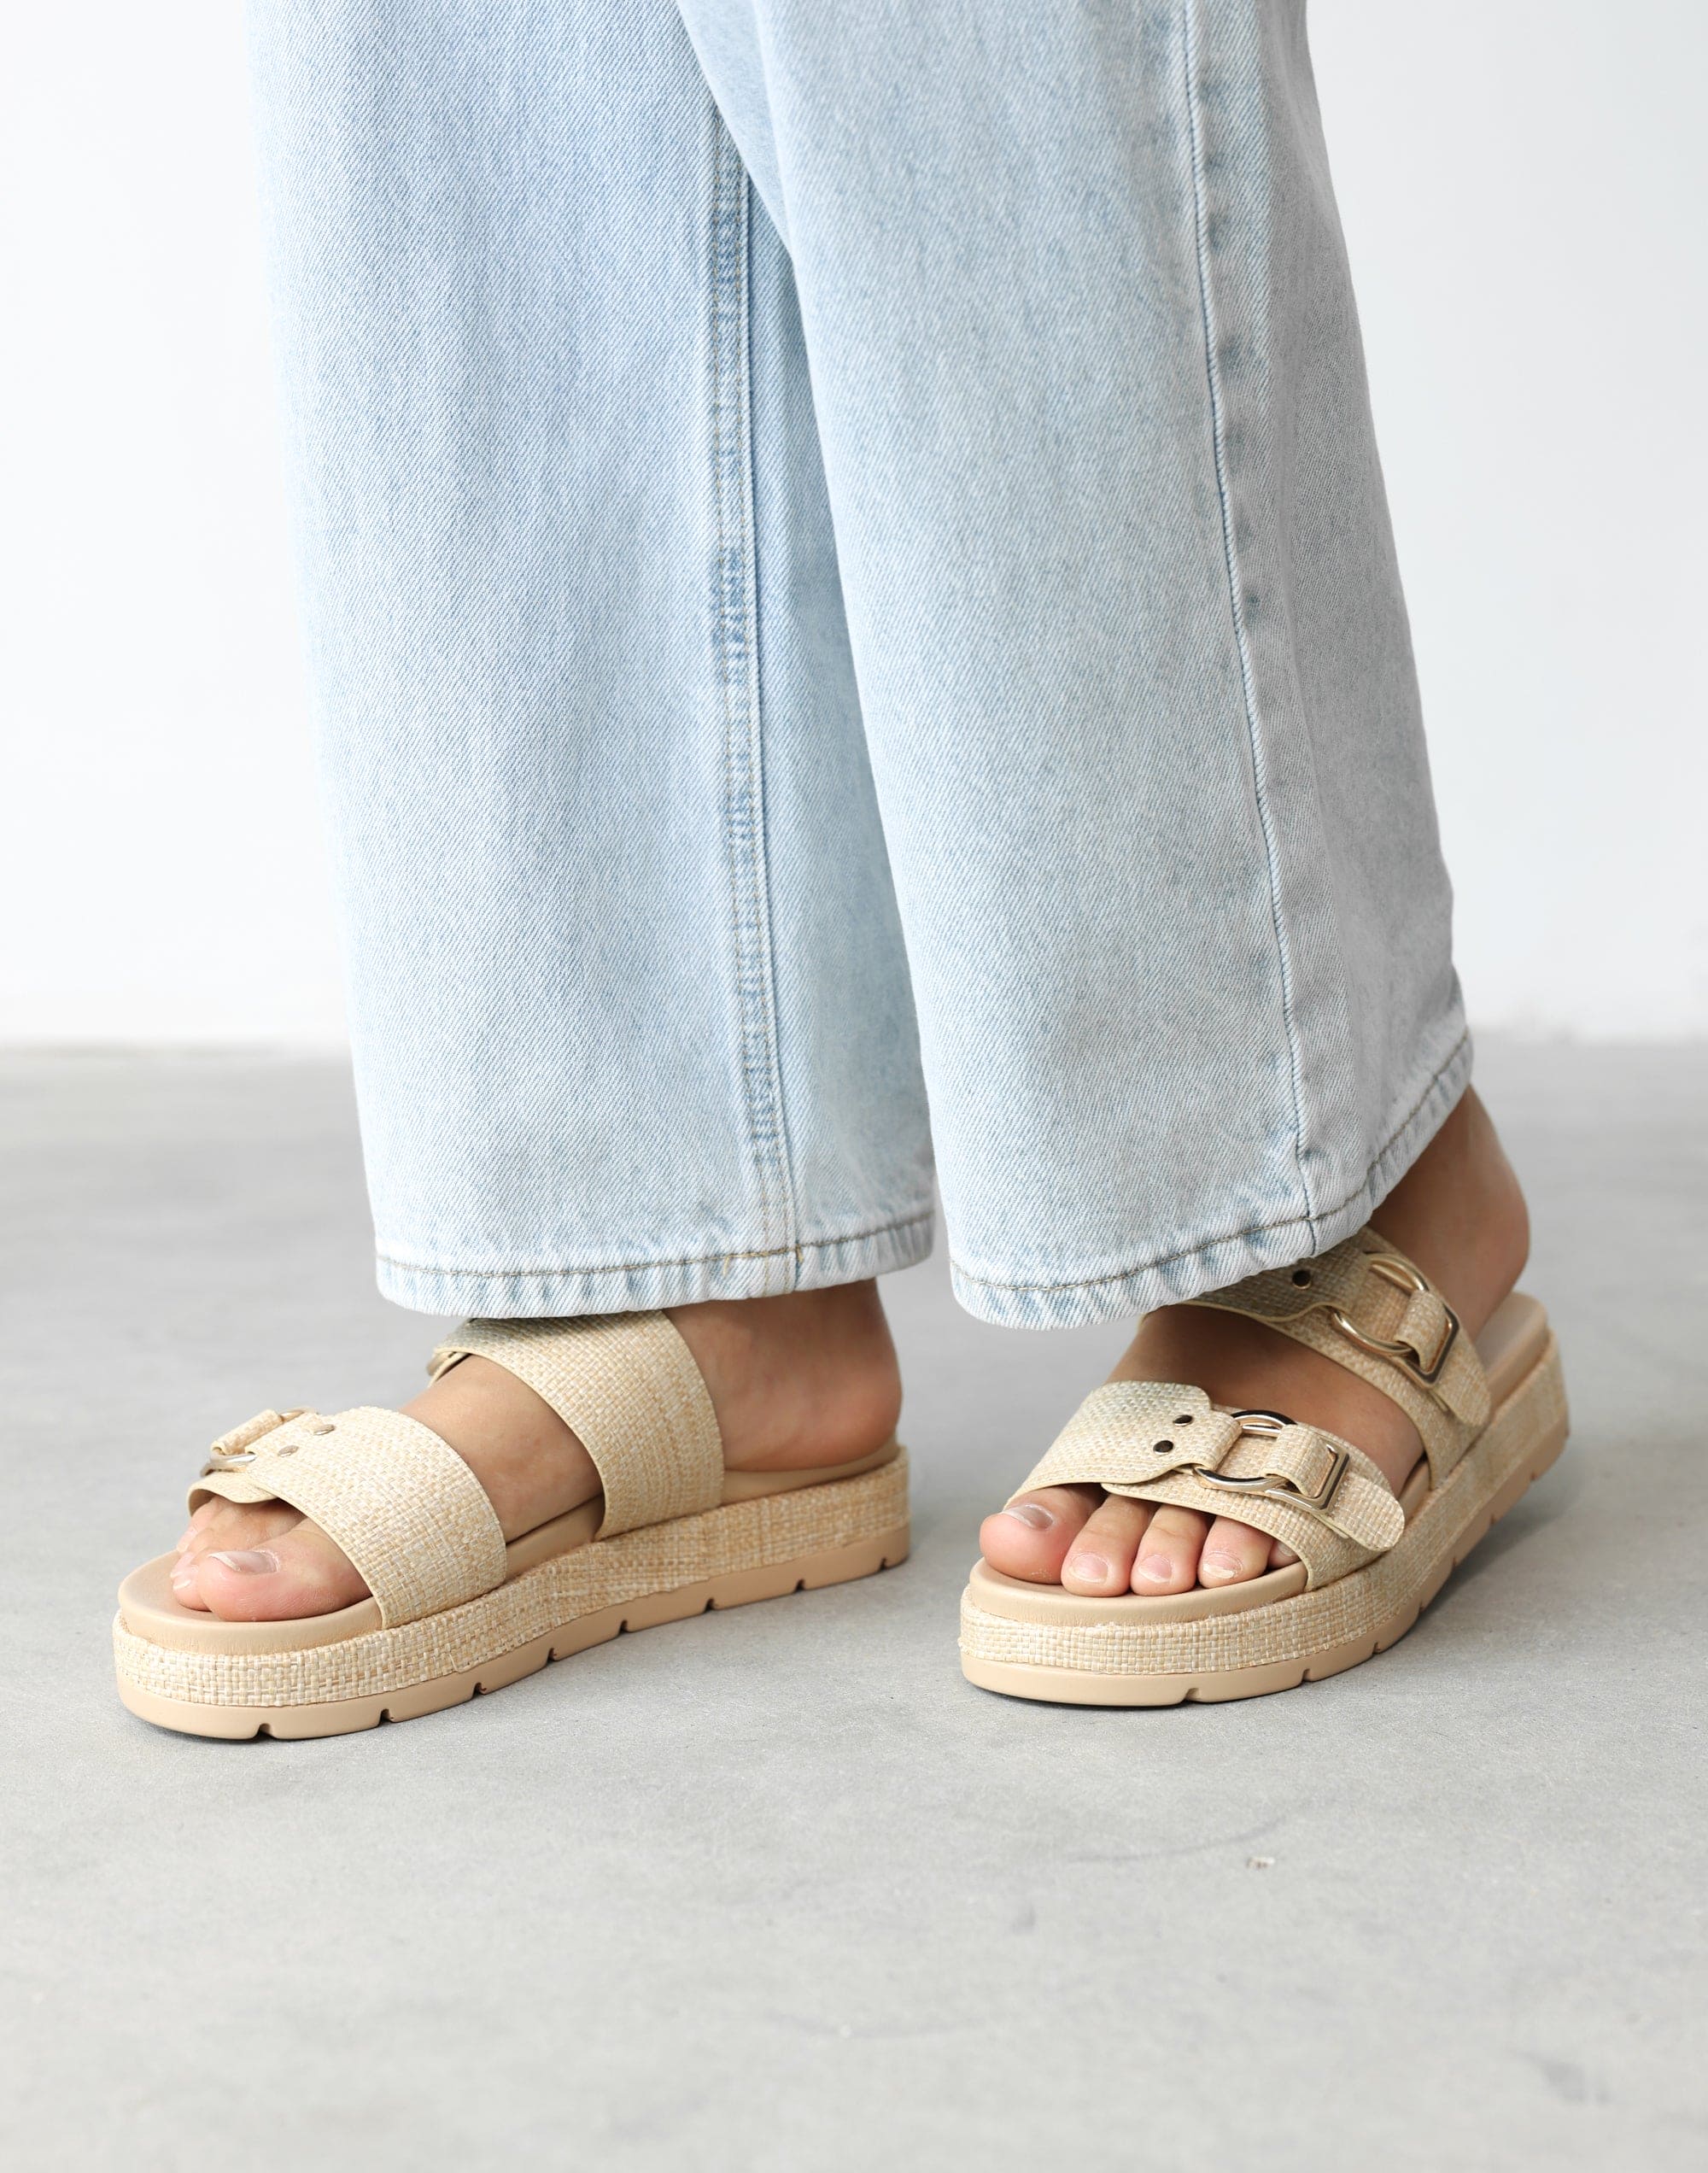 Litmus Sandals (Natural Raffia) - By Therapy